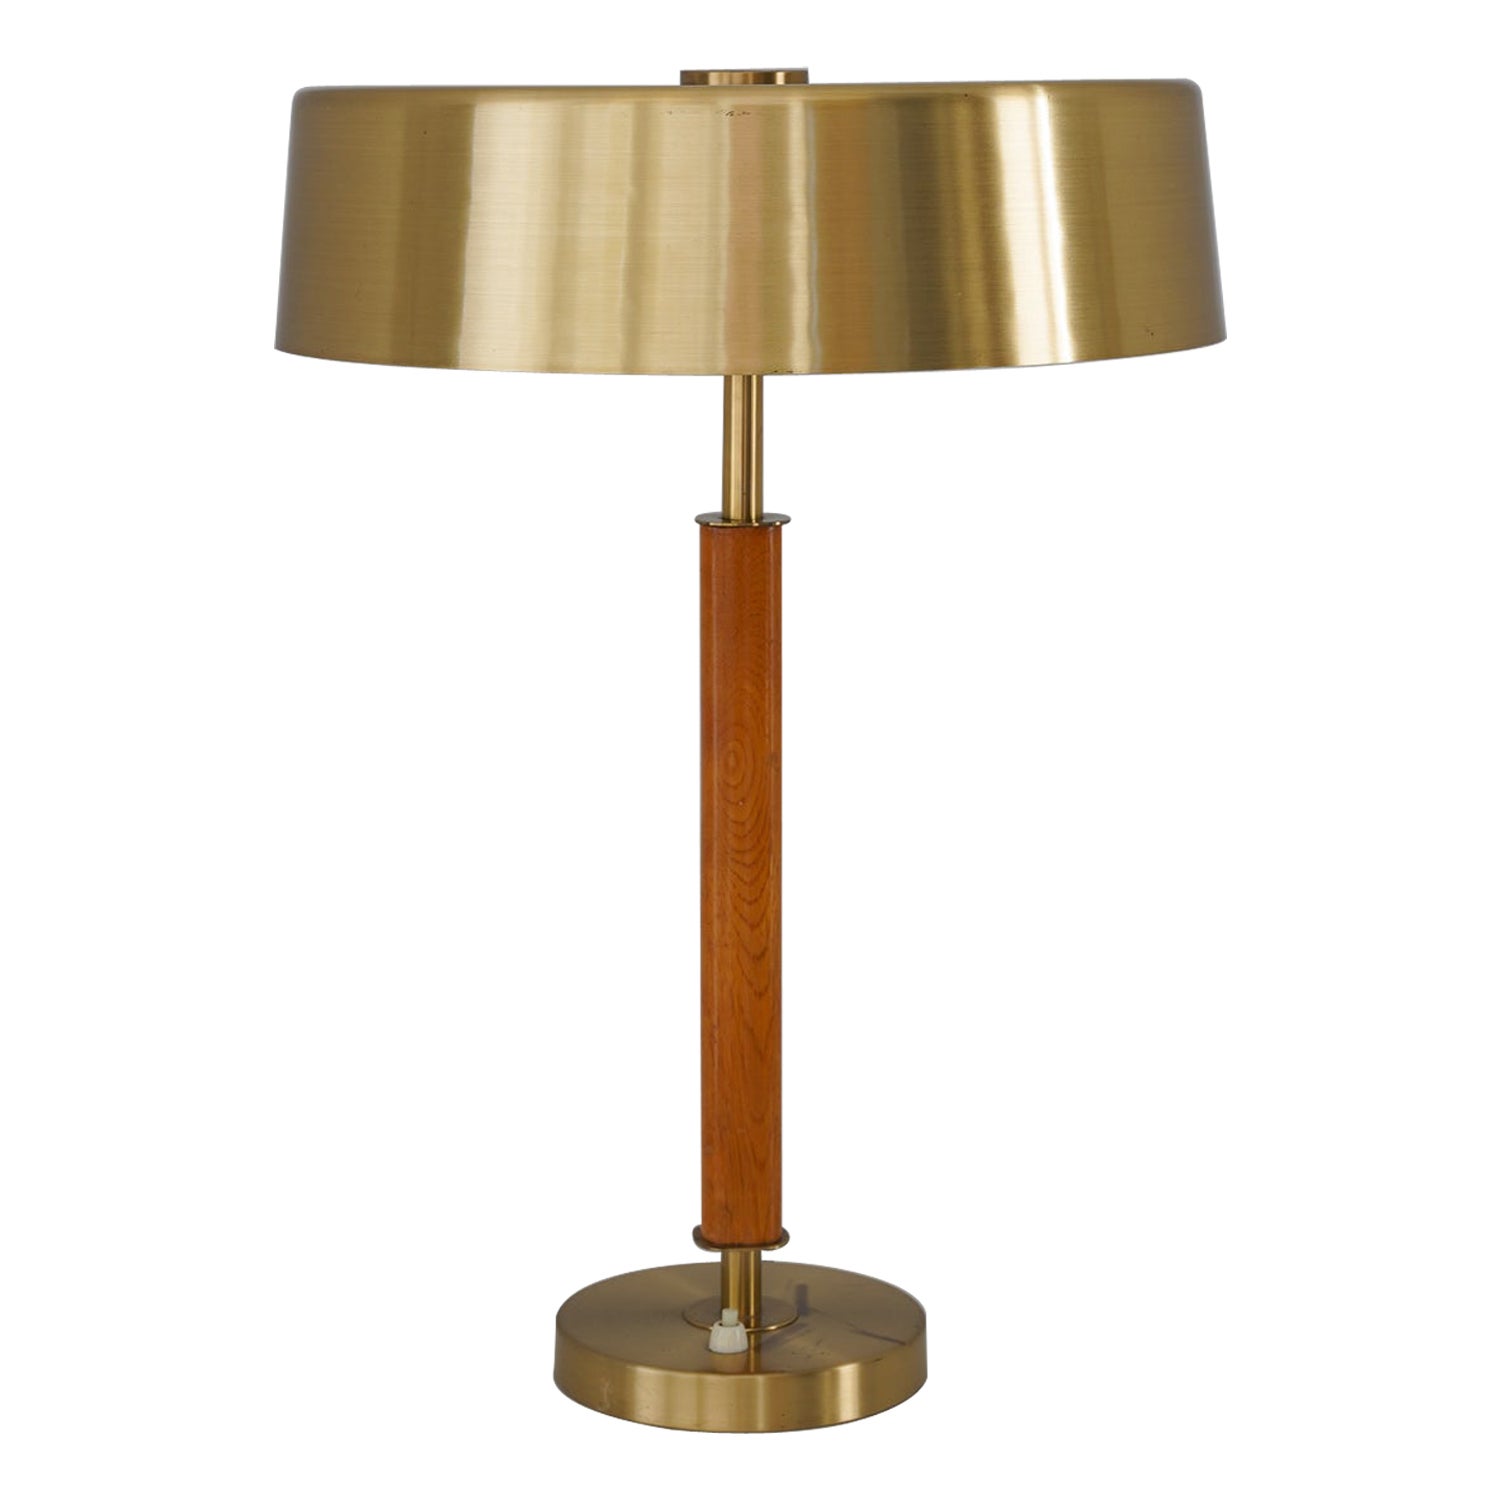 Swedish Mid-Century Table Lamp in Brass and Wood by Boréns